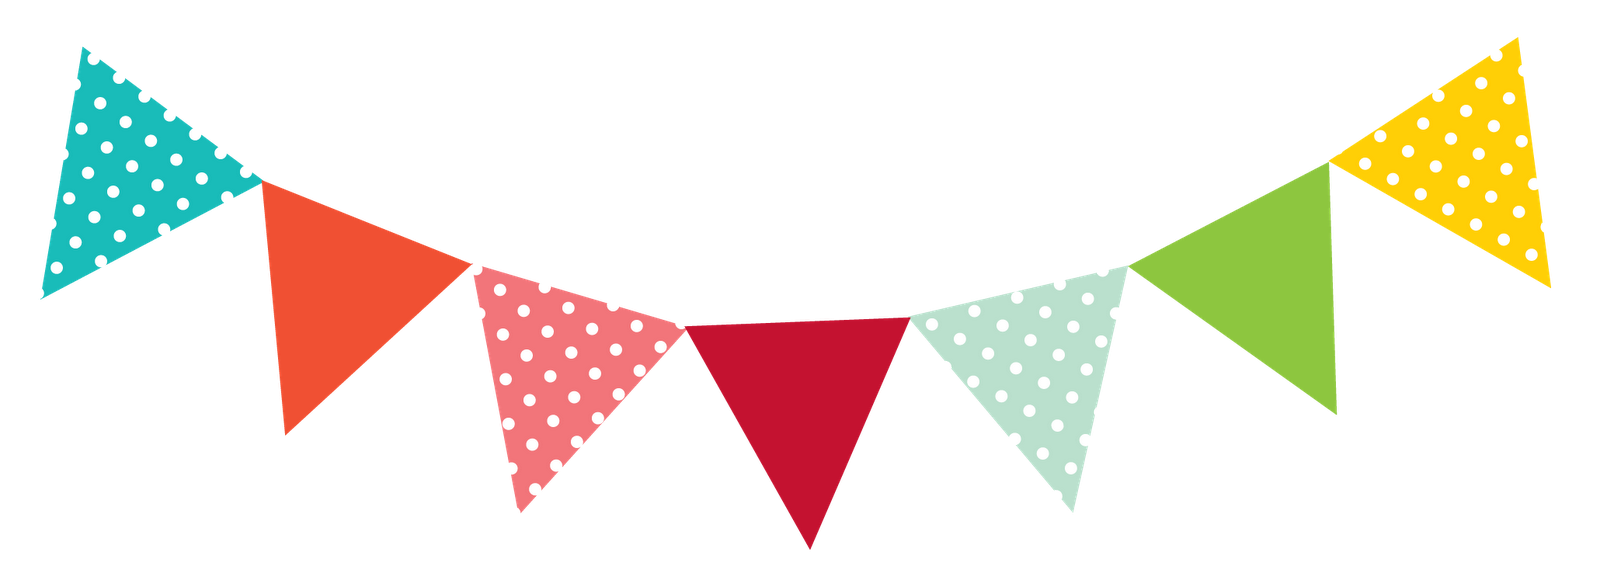 pennant clipart bunting